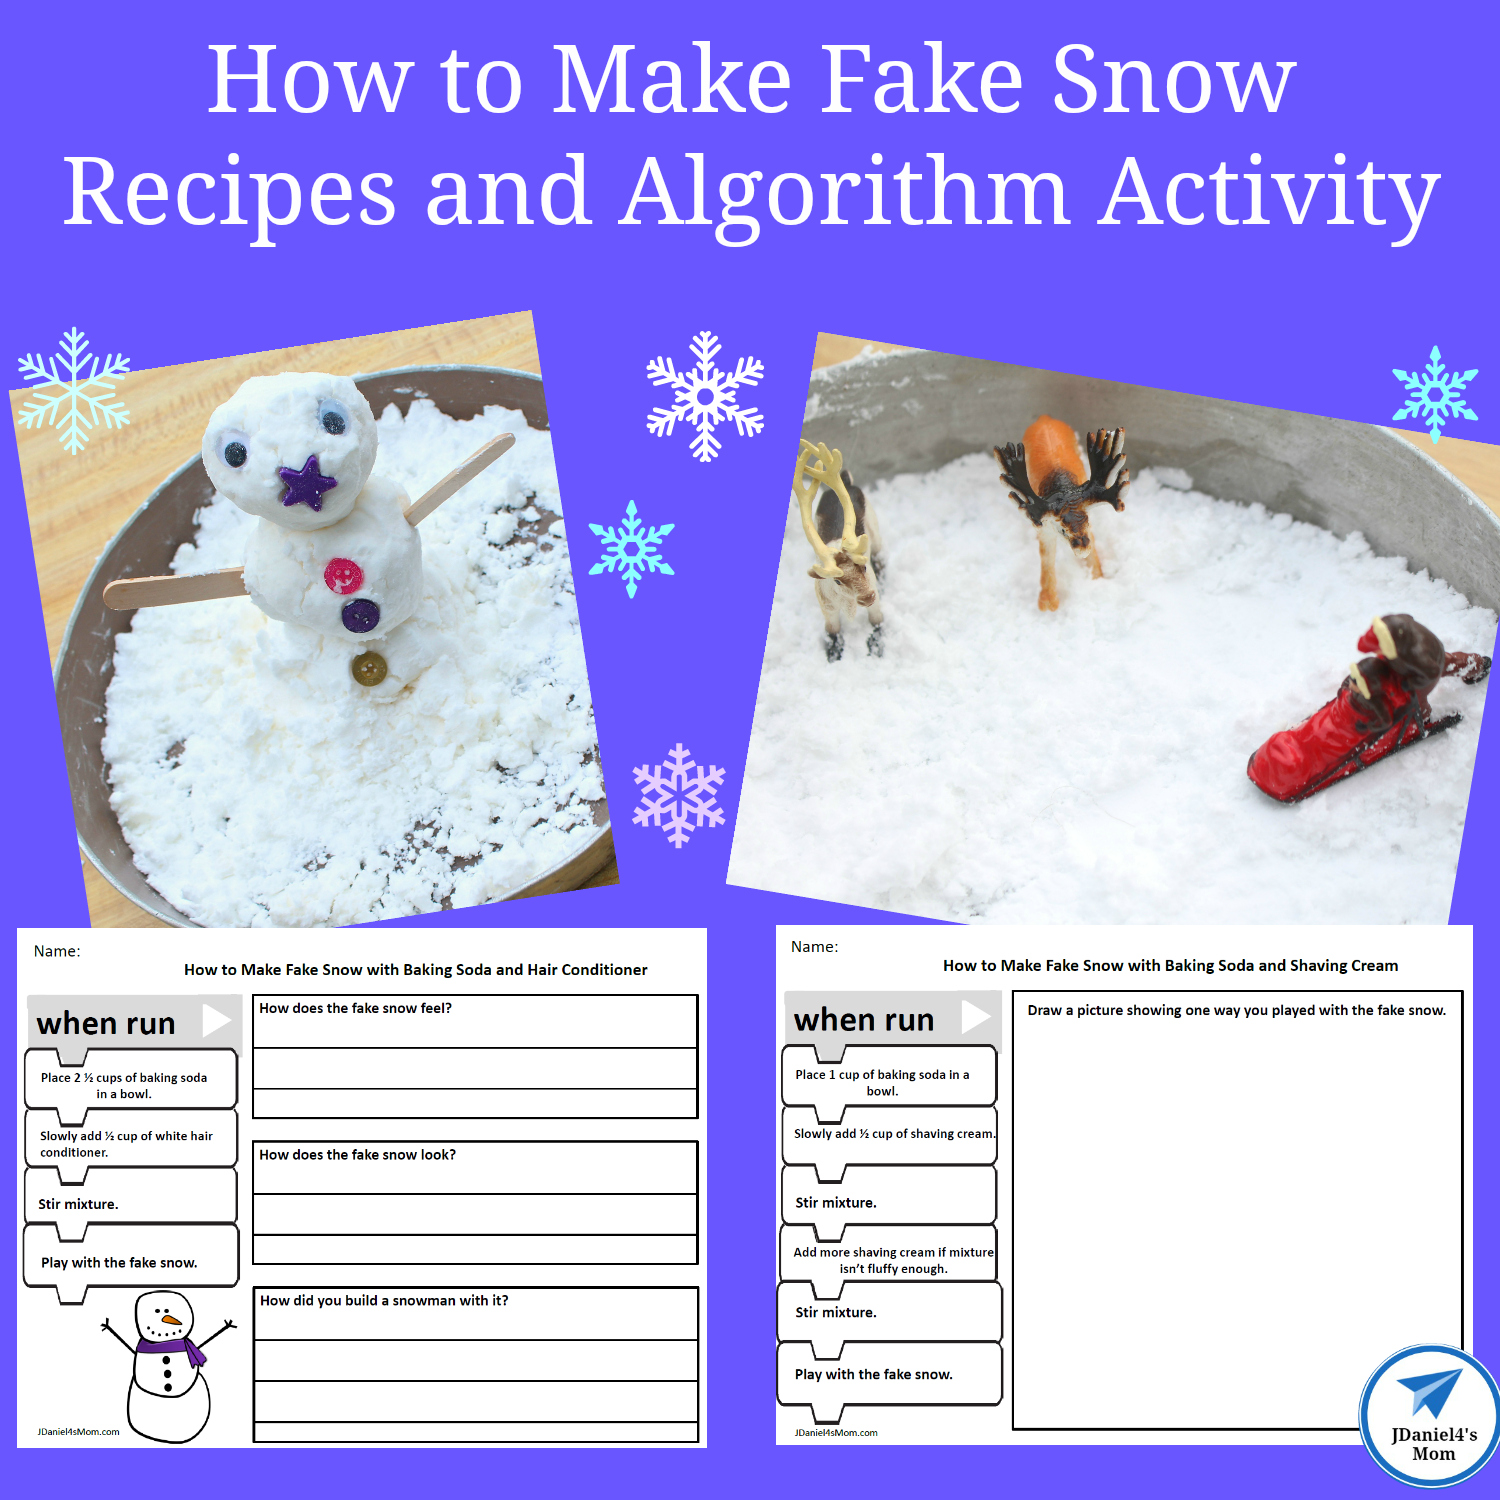 How to Make Fake Snow Recipes and Algorithm Activity with Baking Soda 